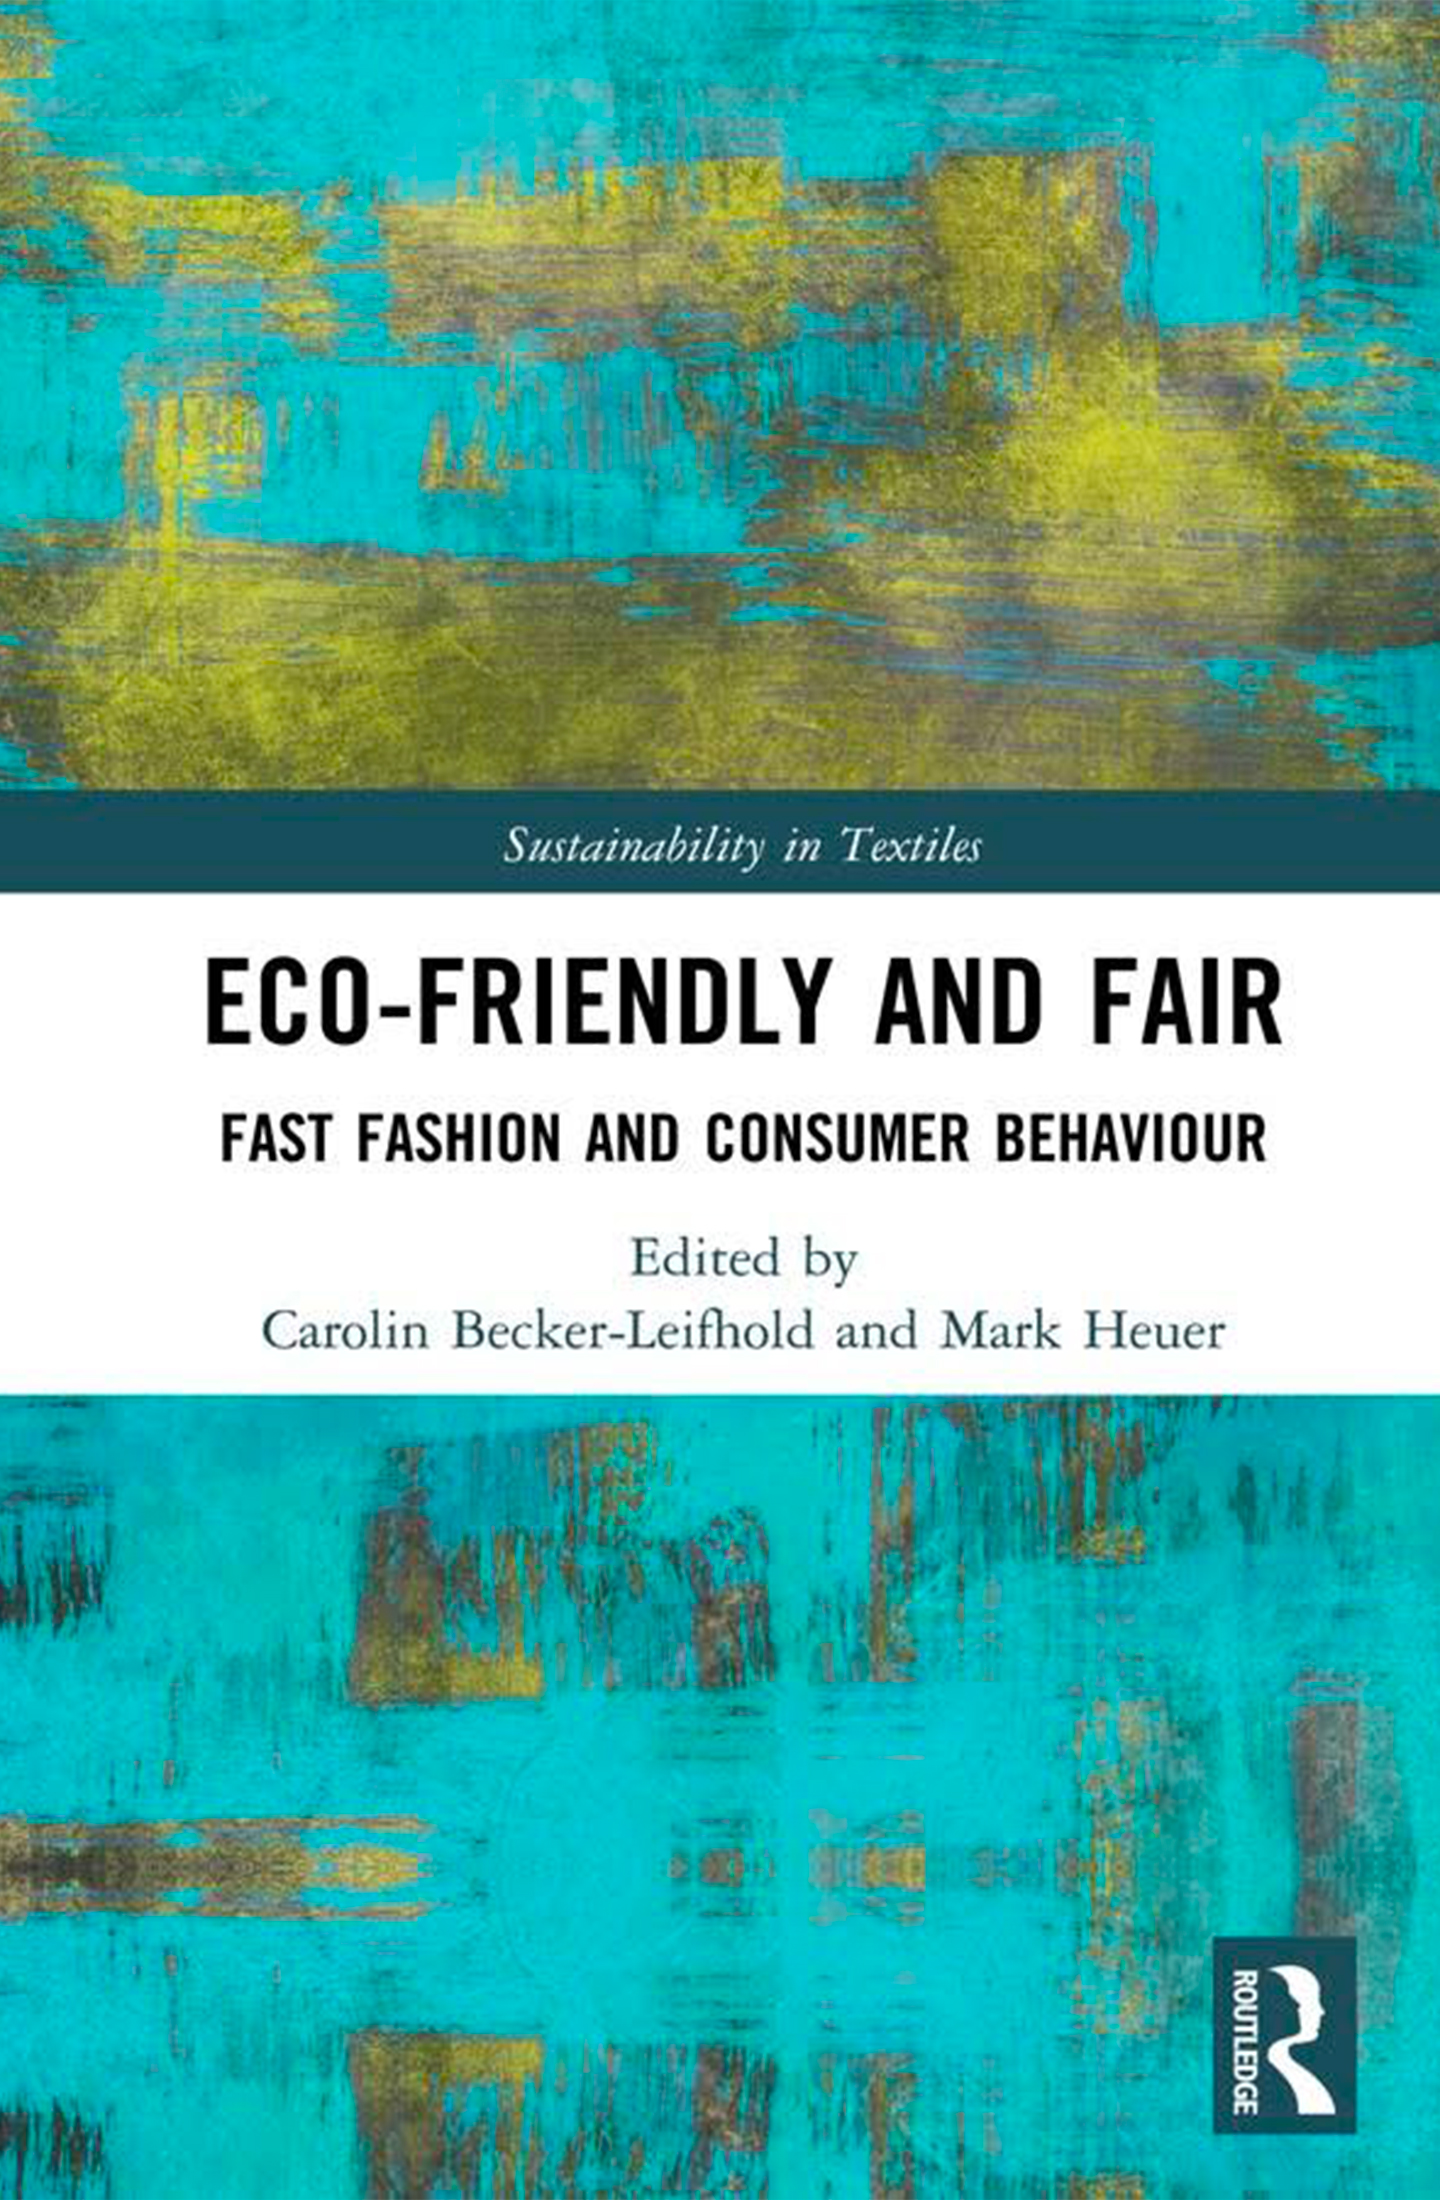 Heuer, M, & Becker-Leifhold, C (eds) 2017, Eco-Friendly and Fair: Fast Fashion and Consumer Behaviour, Taylor & Francis Group, Milton